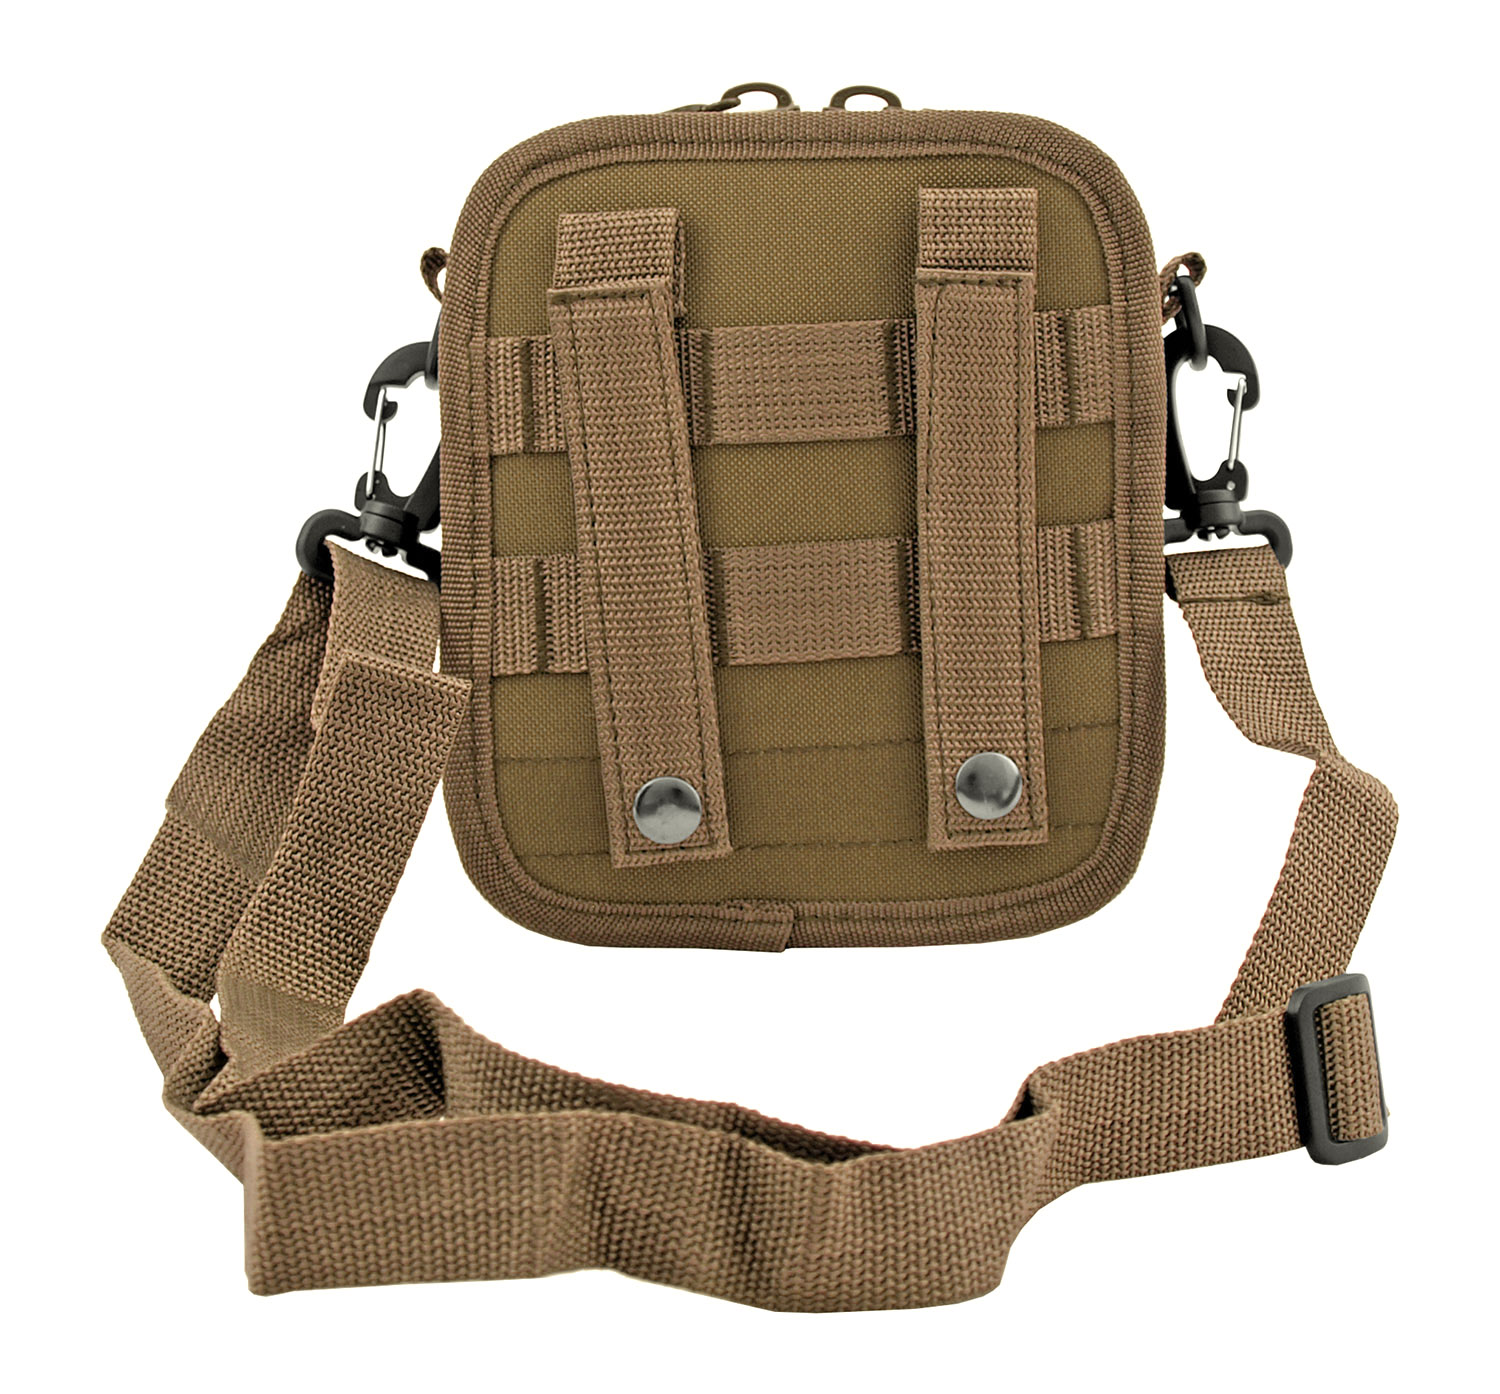 The Tactical Over the Shoulder Everyday Carry Attachment Bag - Desert Tan